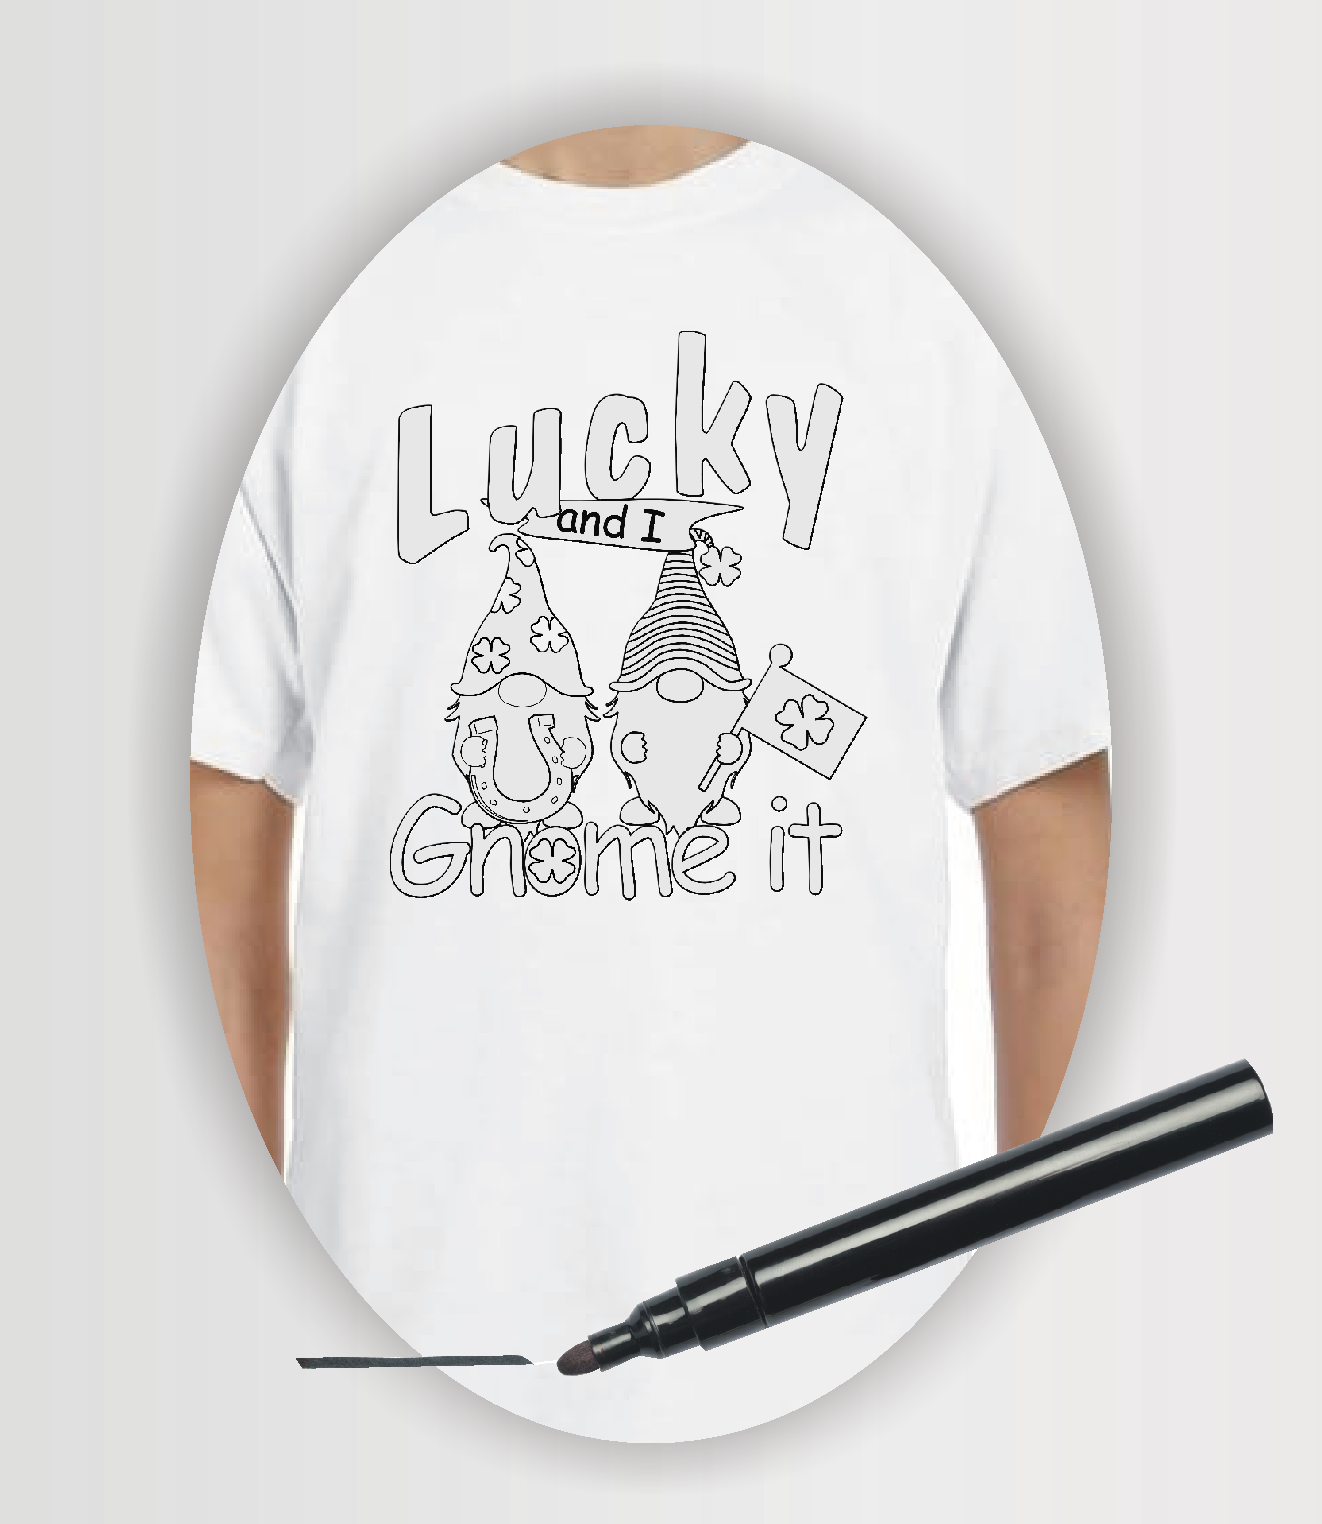 Wearable Art colouring t-shirt with "lucky and I gnome it" and two gnomes